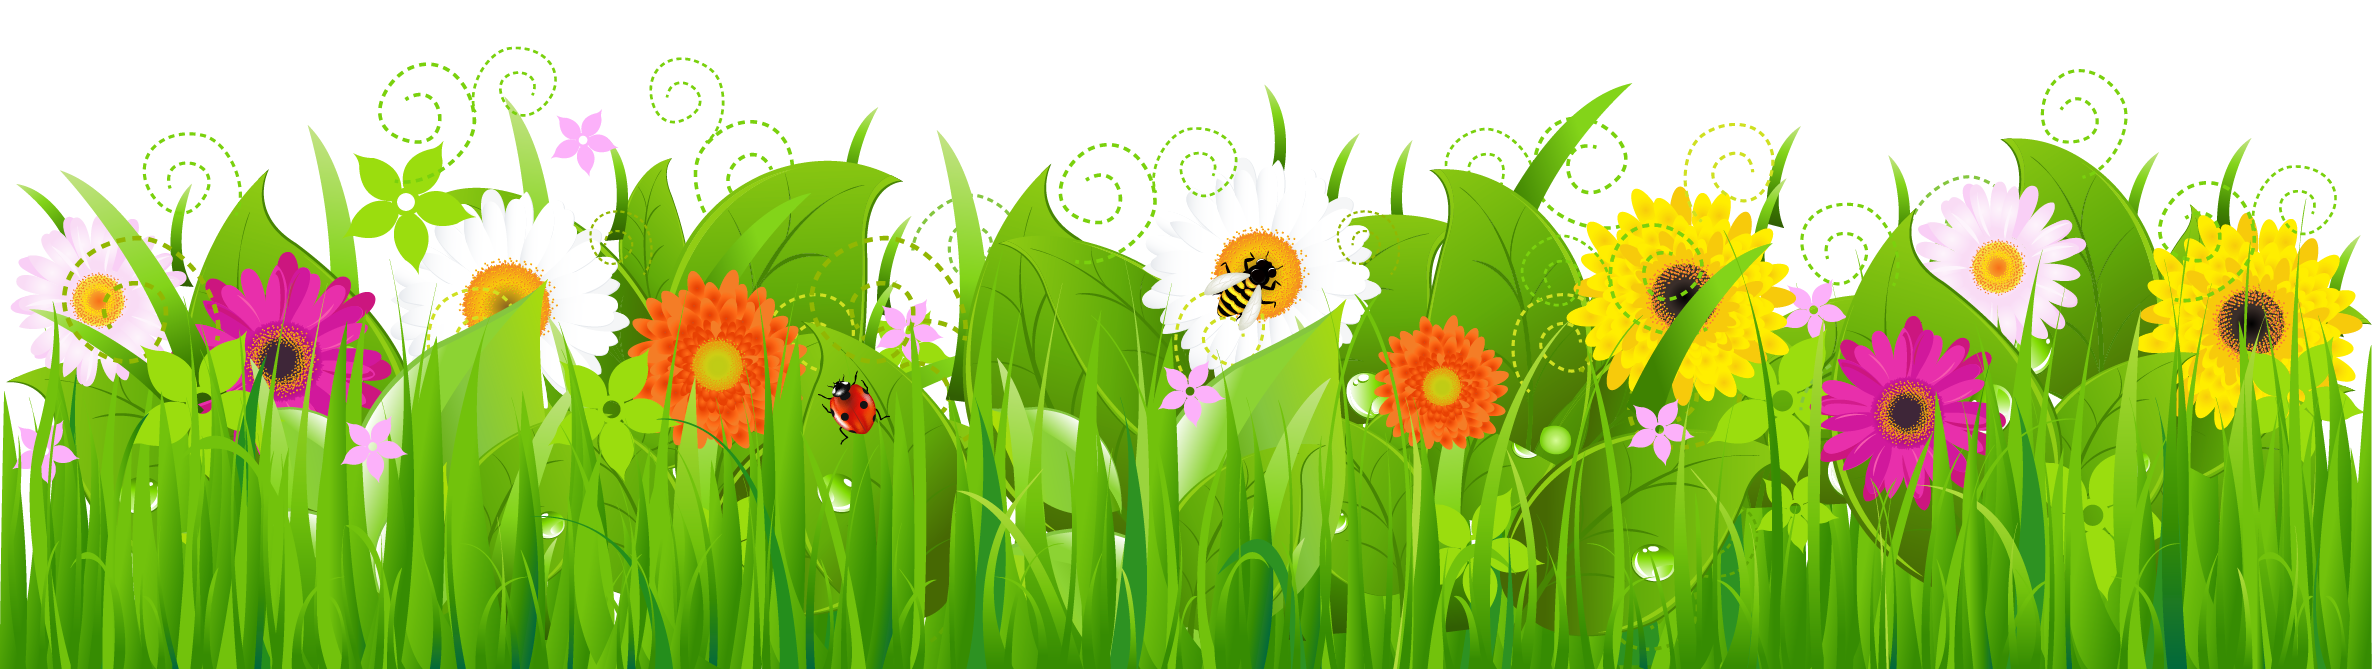 free clipart grass and flowers - photo #8